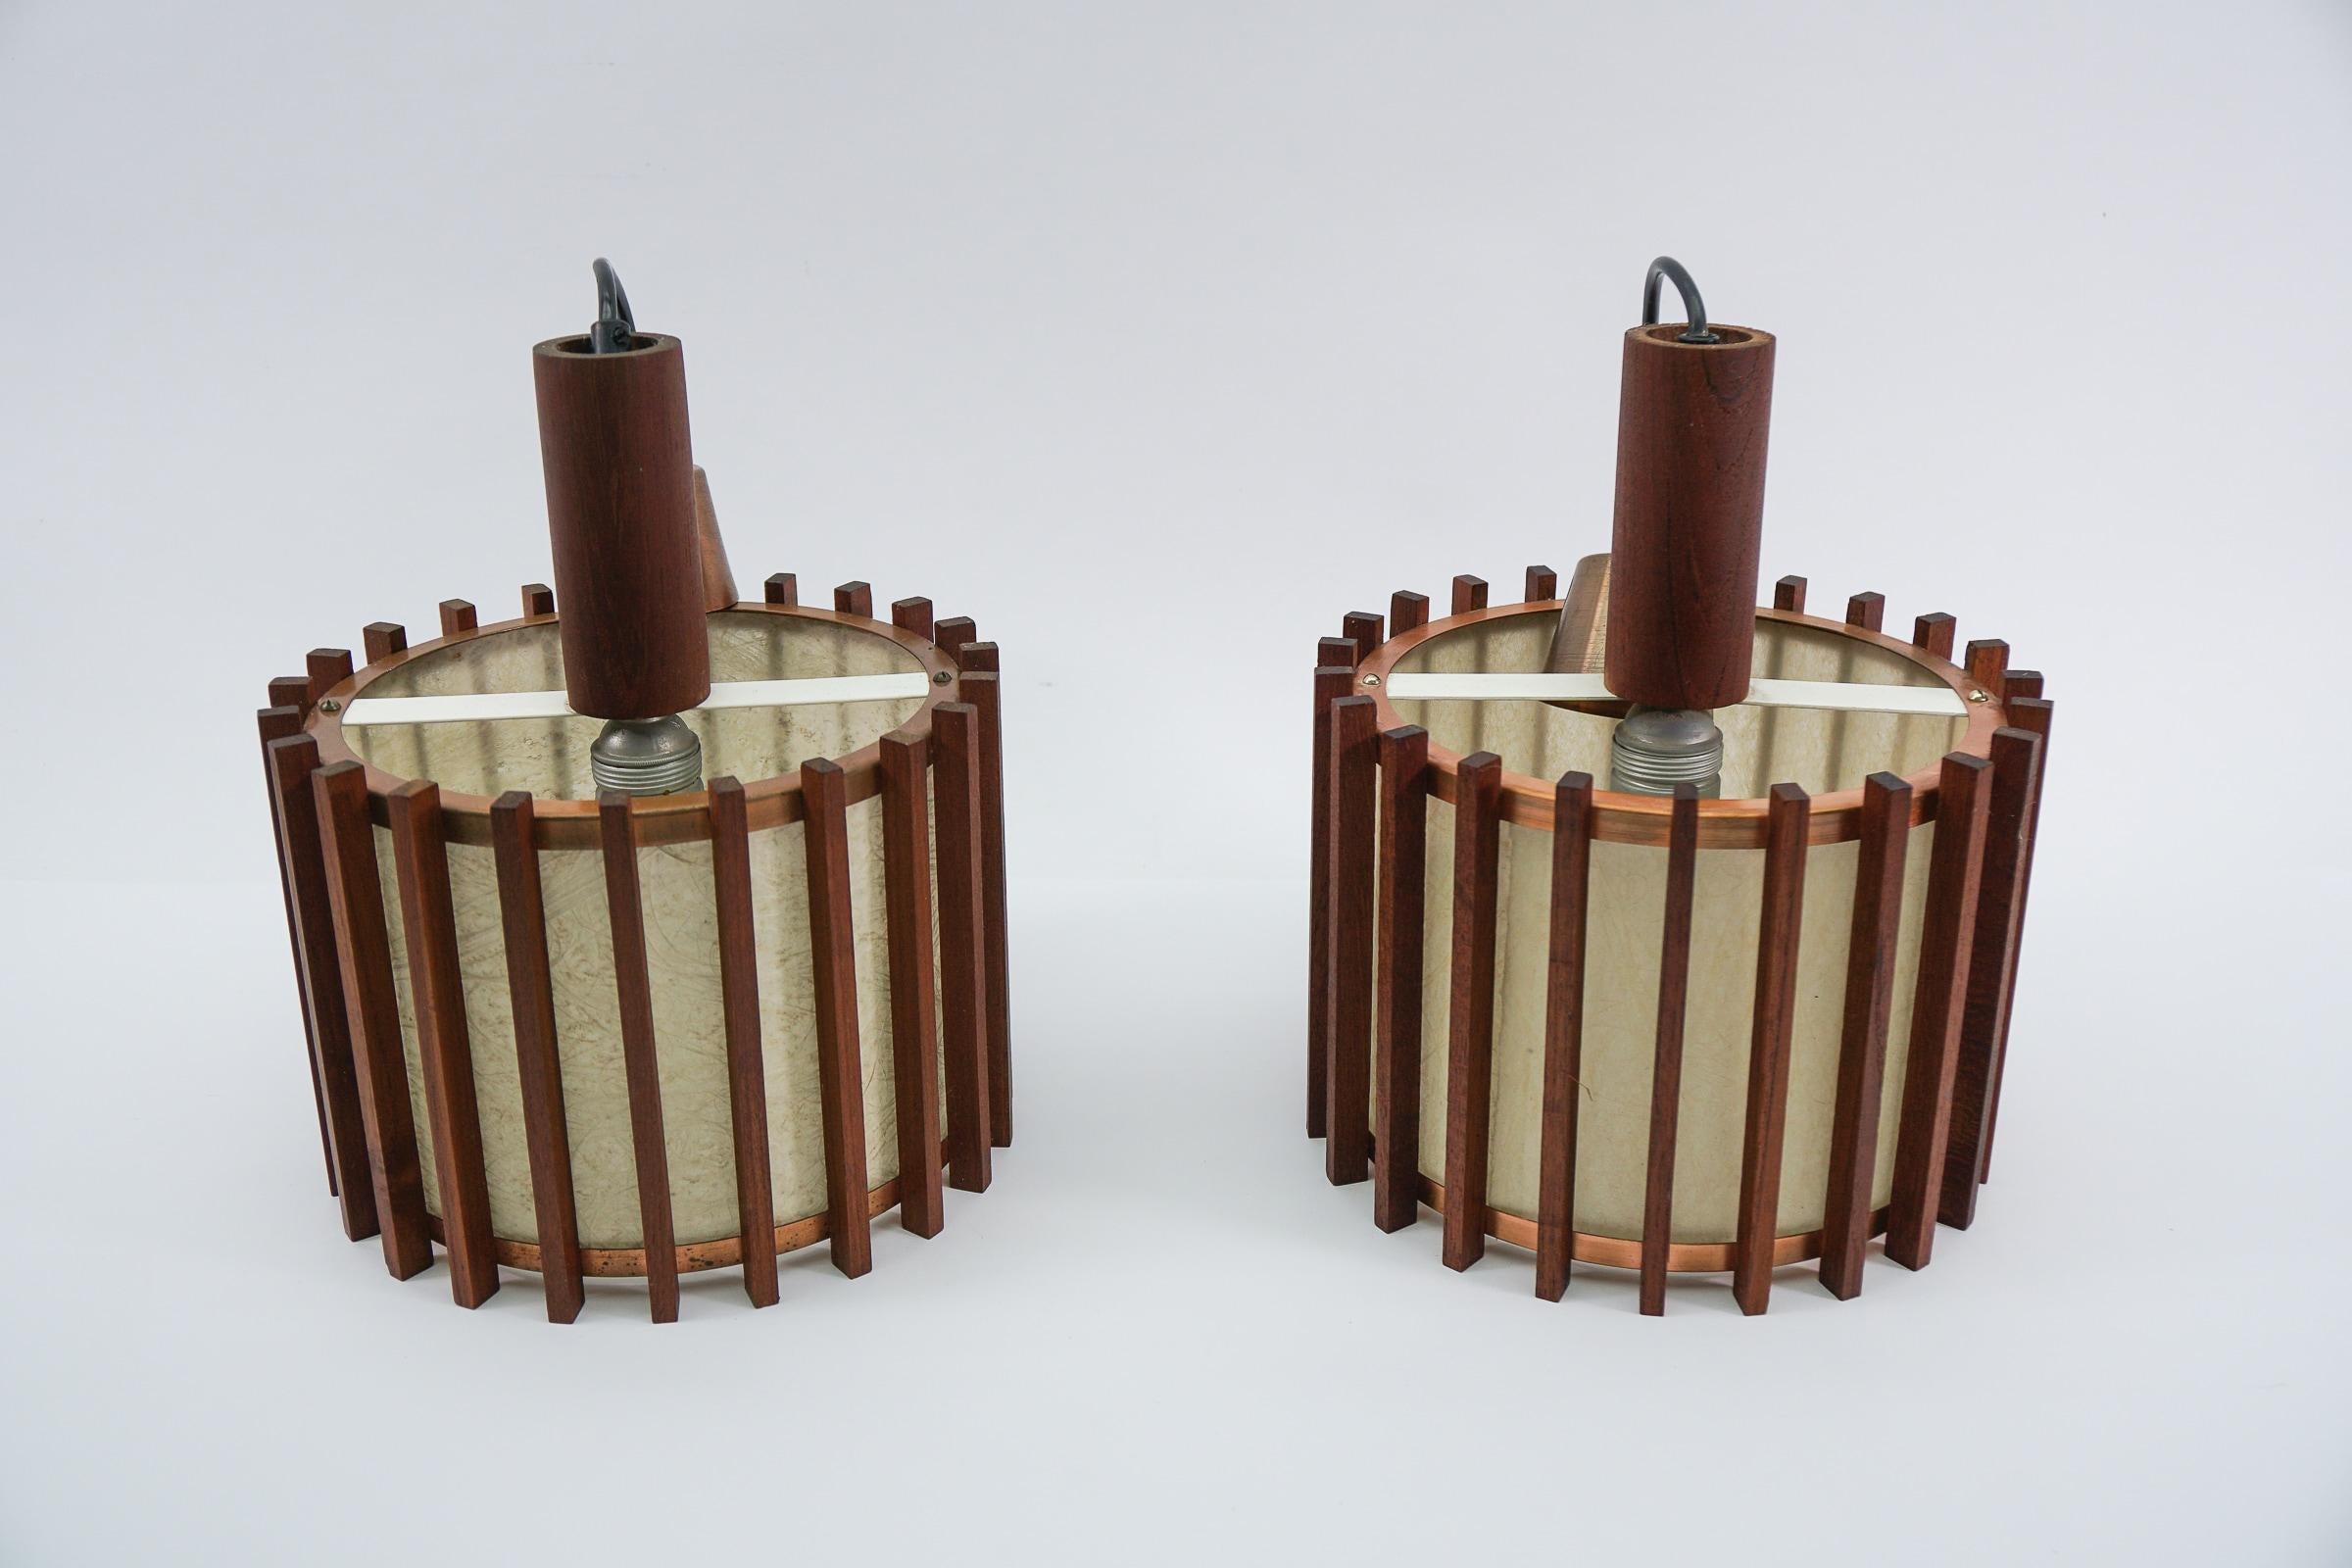 Pair of Scandinavian Mid-Century Modern Ceiling Lamps in Teak Wood and Copper For Sale 9